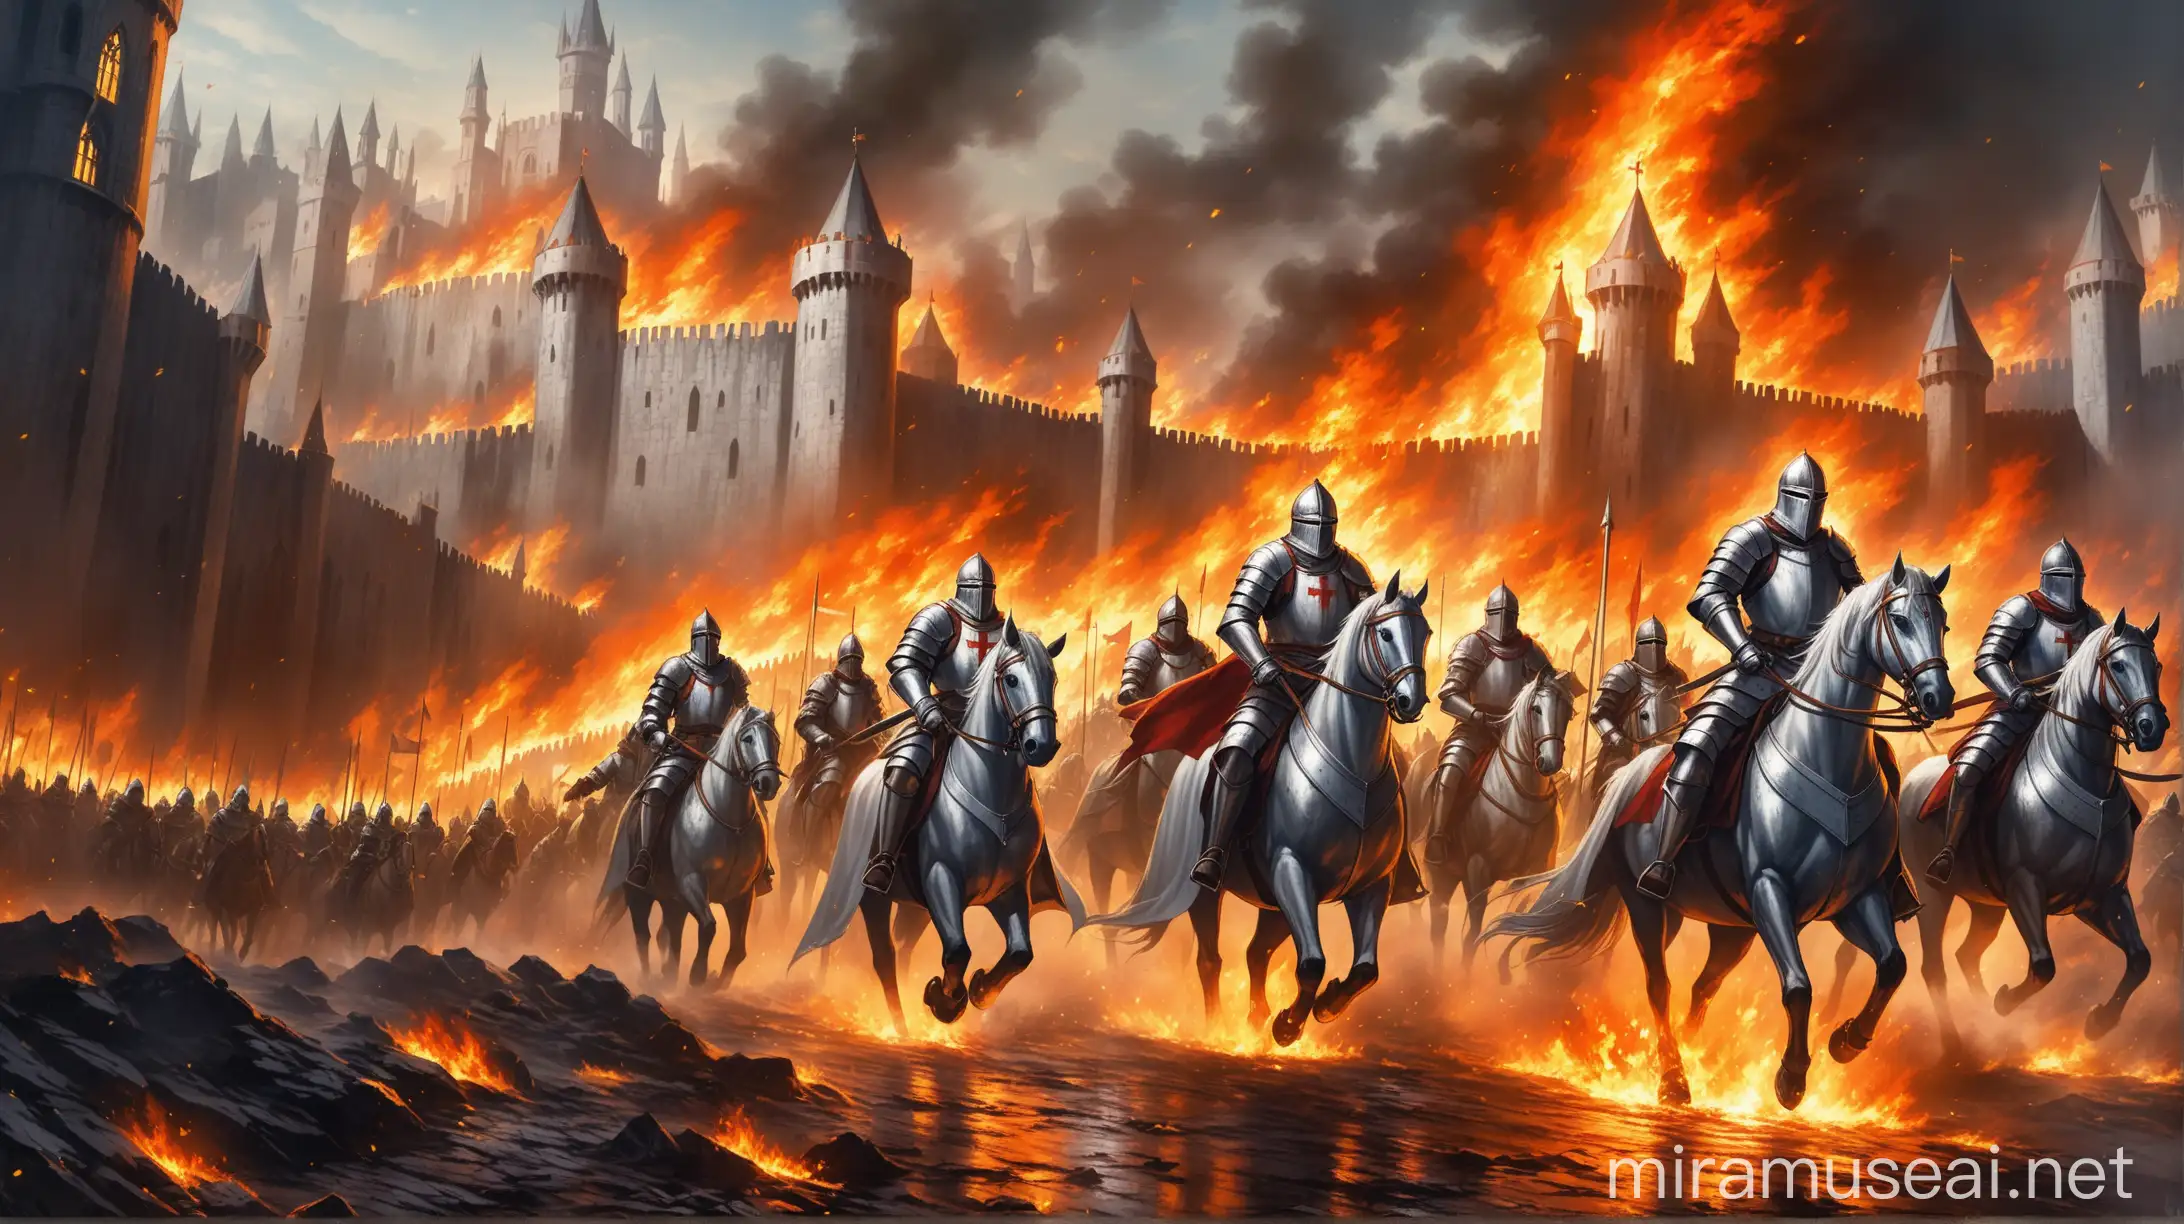 band of medieval crusaders, riding on horses, wearing silver armor, in a crumbling city, city on fire